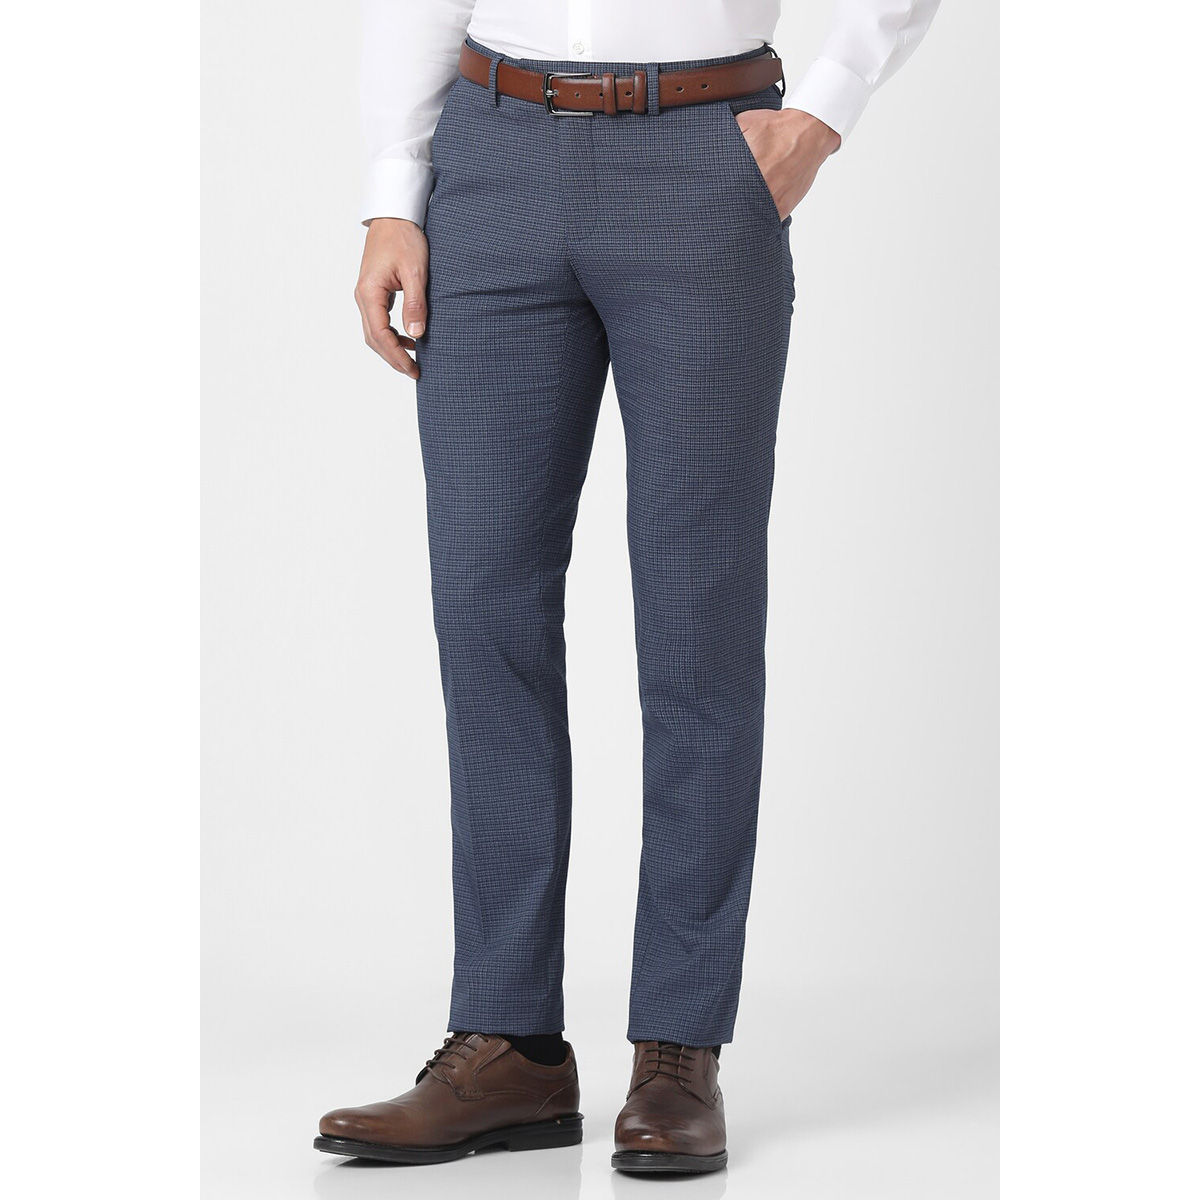 Buy Peter England Beige Slim Fit Trousers for Mens Online @ Tata CLiQ